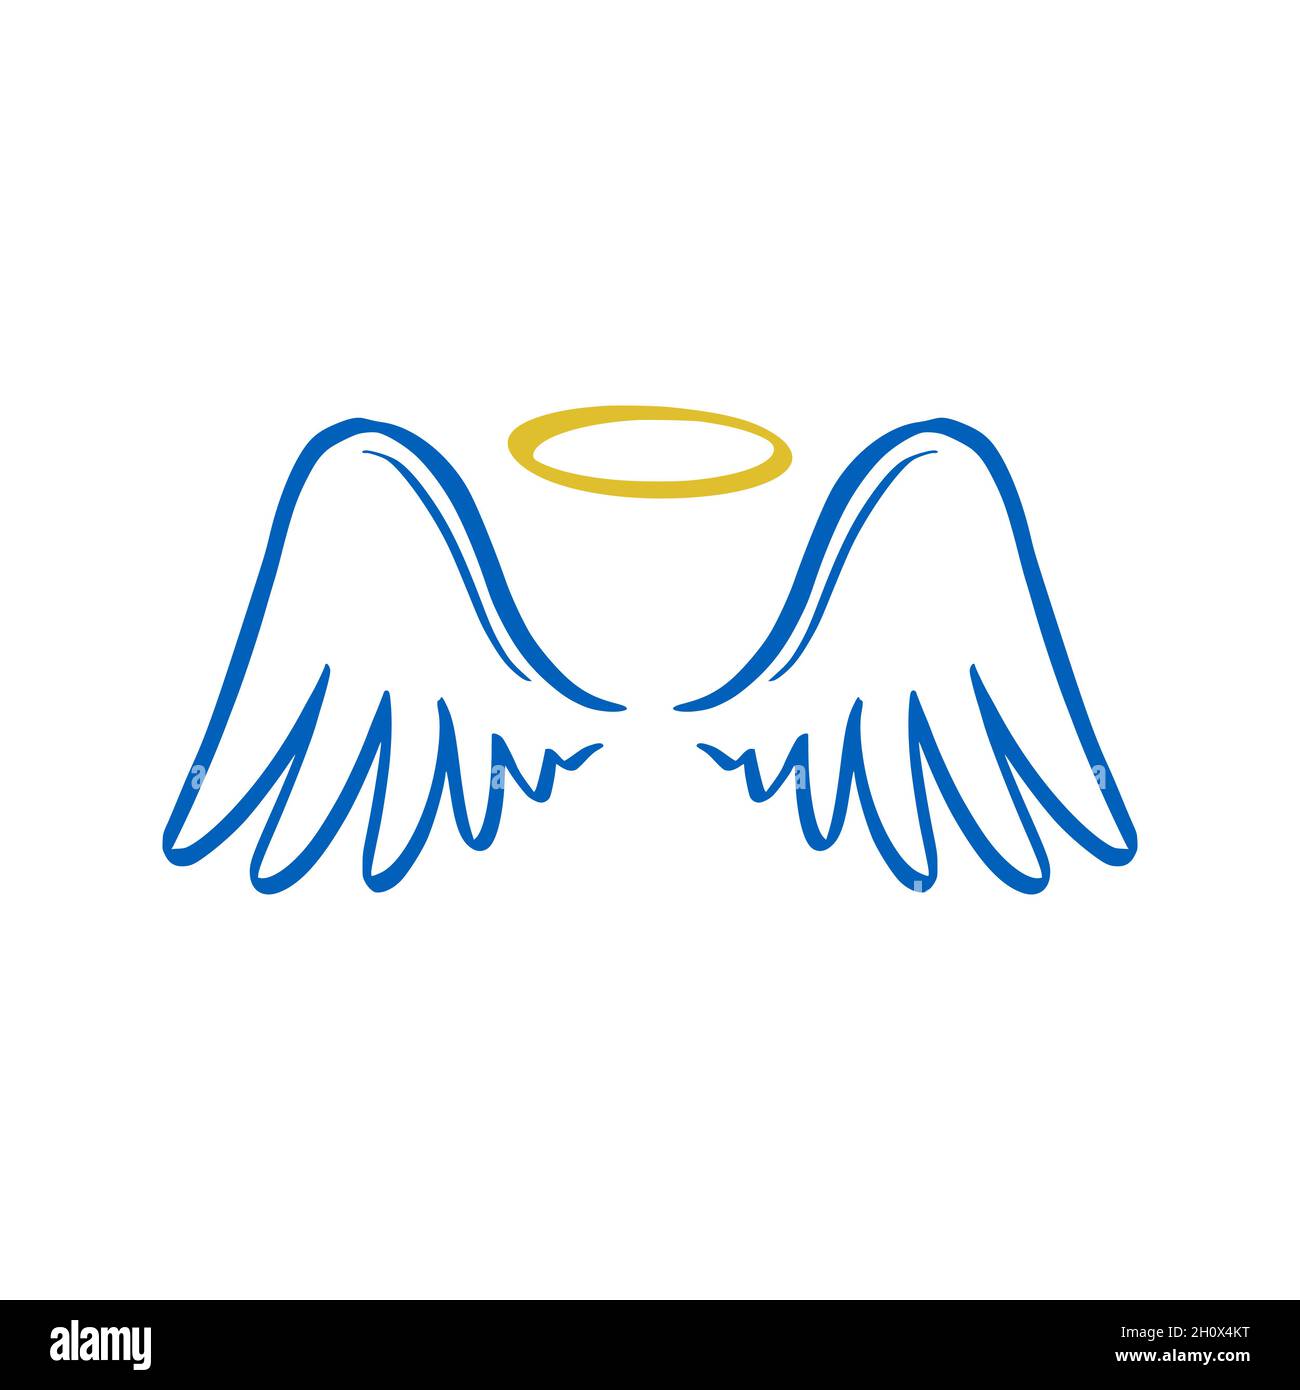 Angel Wings With Halo Drawings